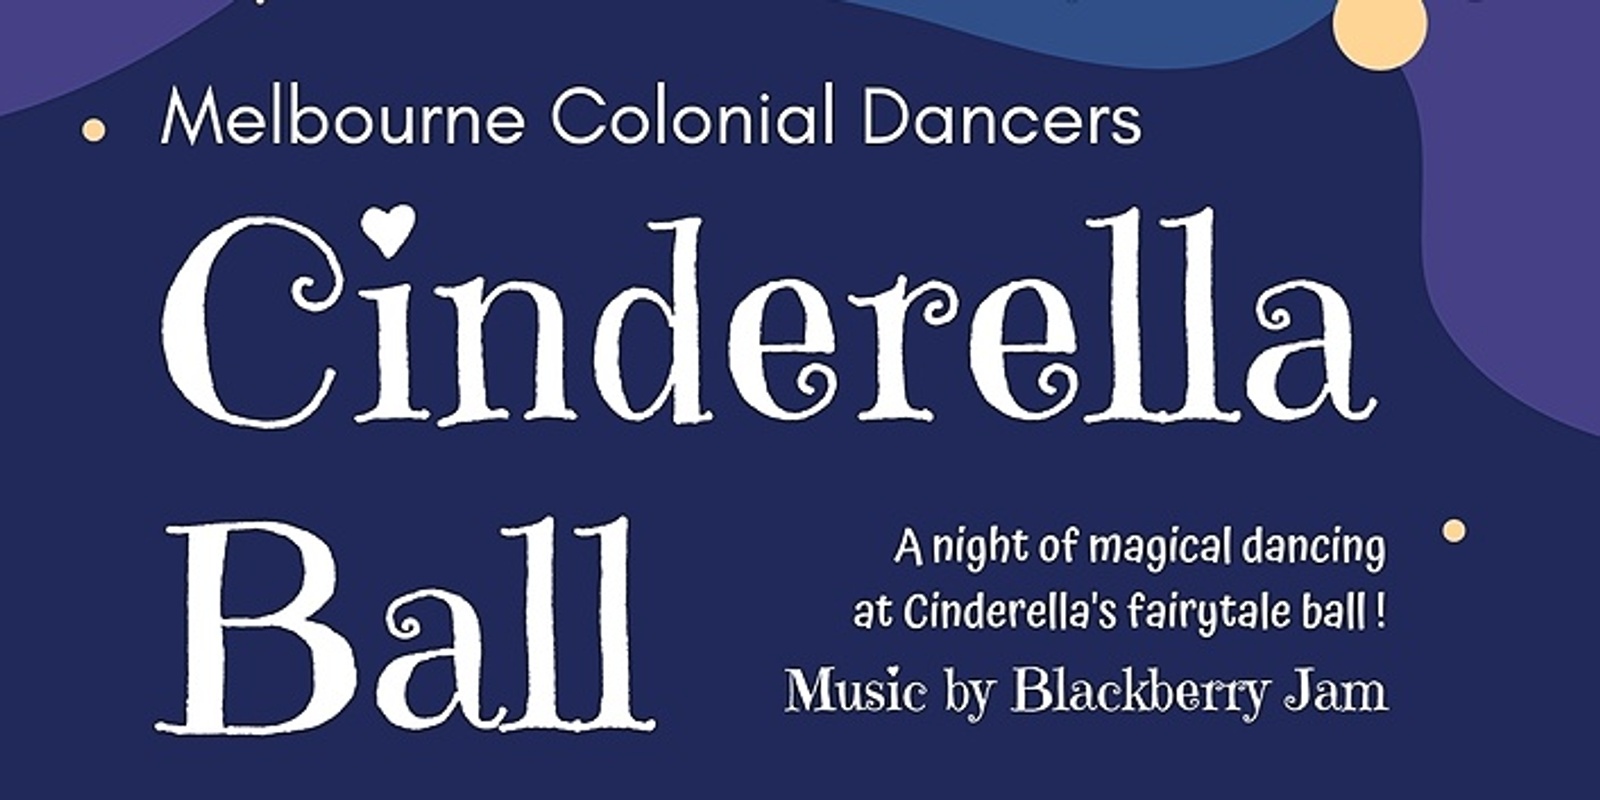 Leaps and Bounds Music  Festival and Melbourne Colonial Dancers Cinderella Ball 2022